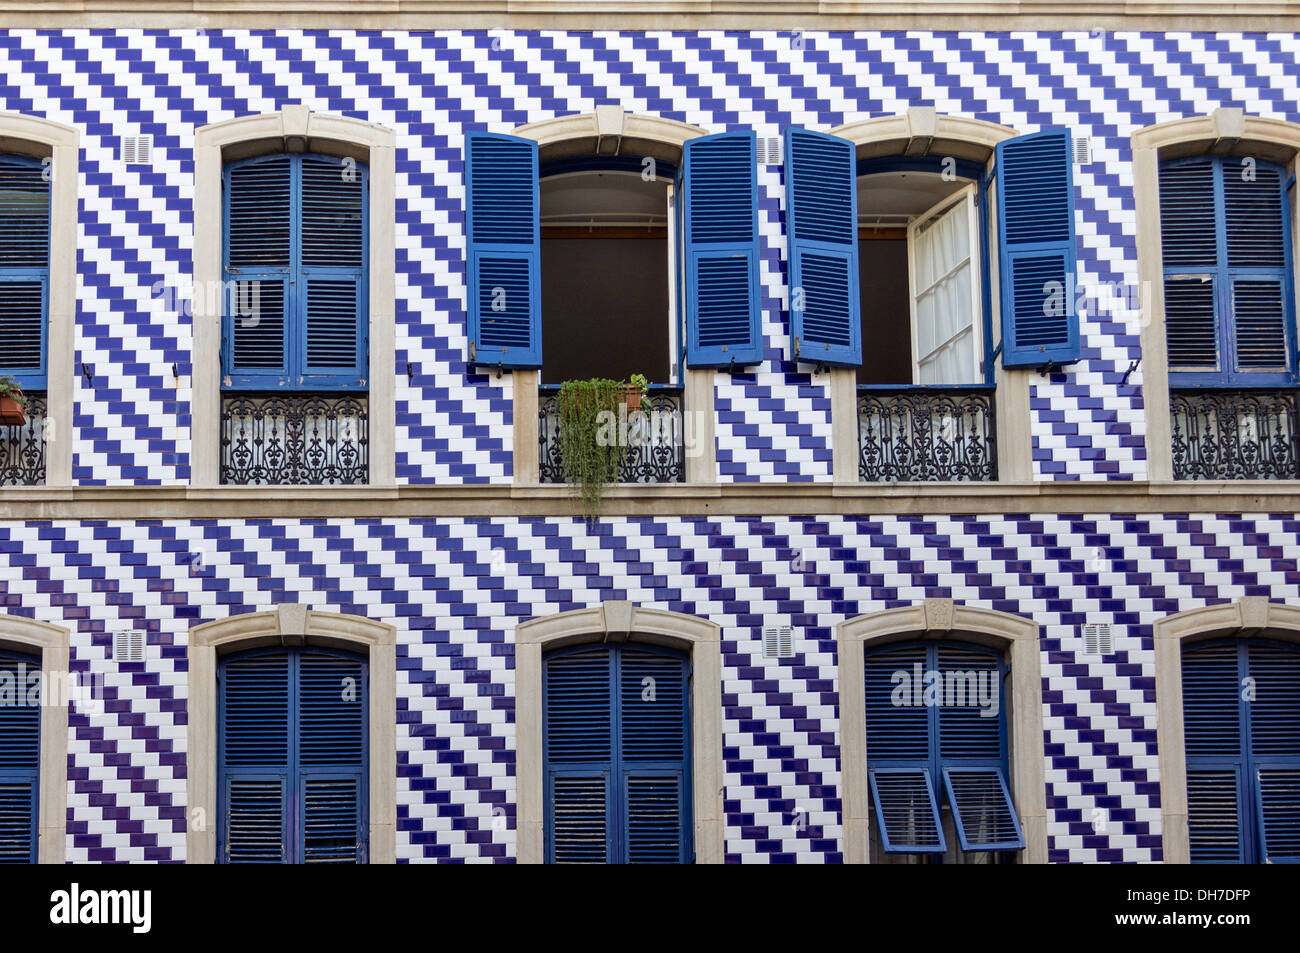 HOUSE WALL WITH BLUE AND WHITE TILES AND BLUE WINDOW SHUTTERS  IN GIBRALTAR Stock Photo